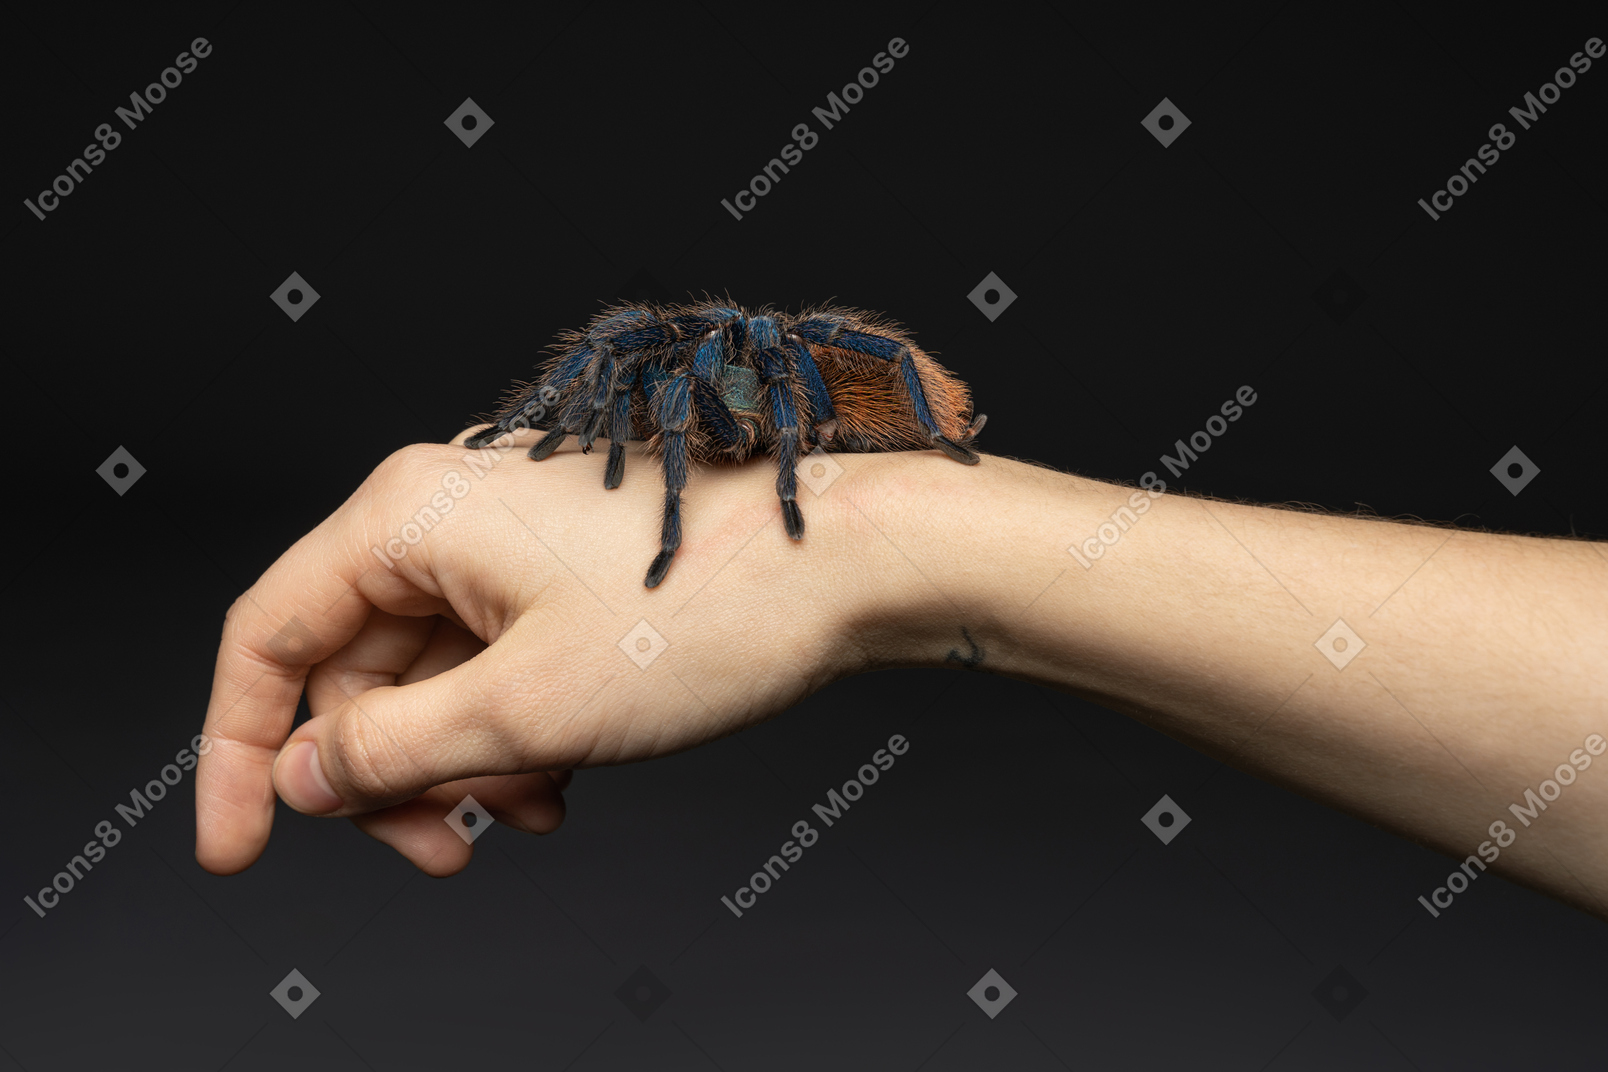 Spider on a human hand